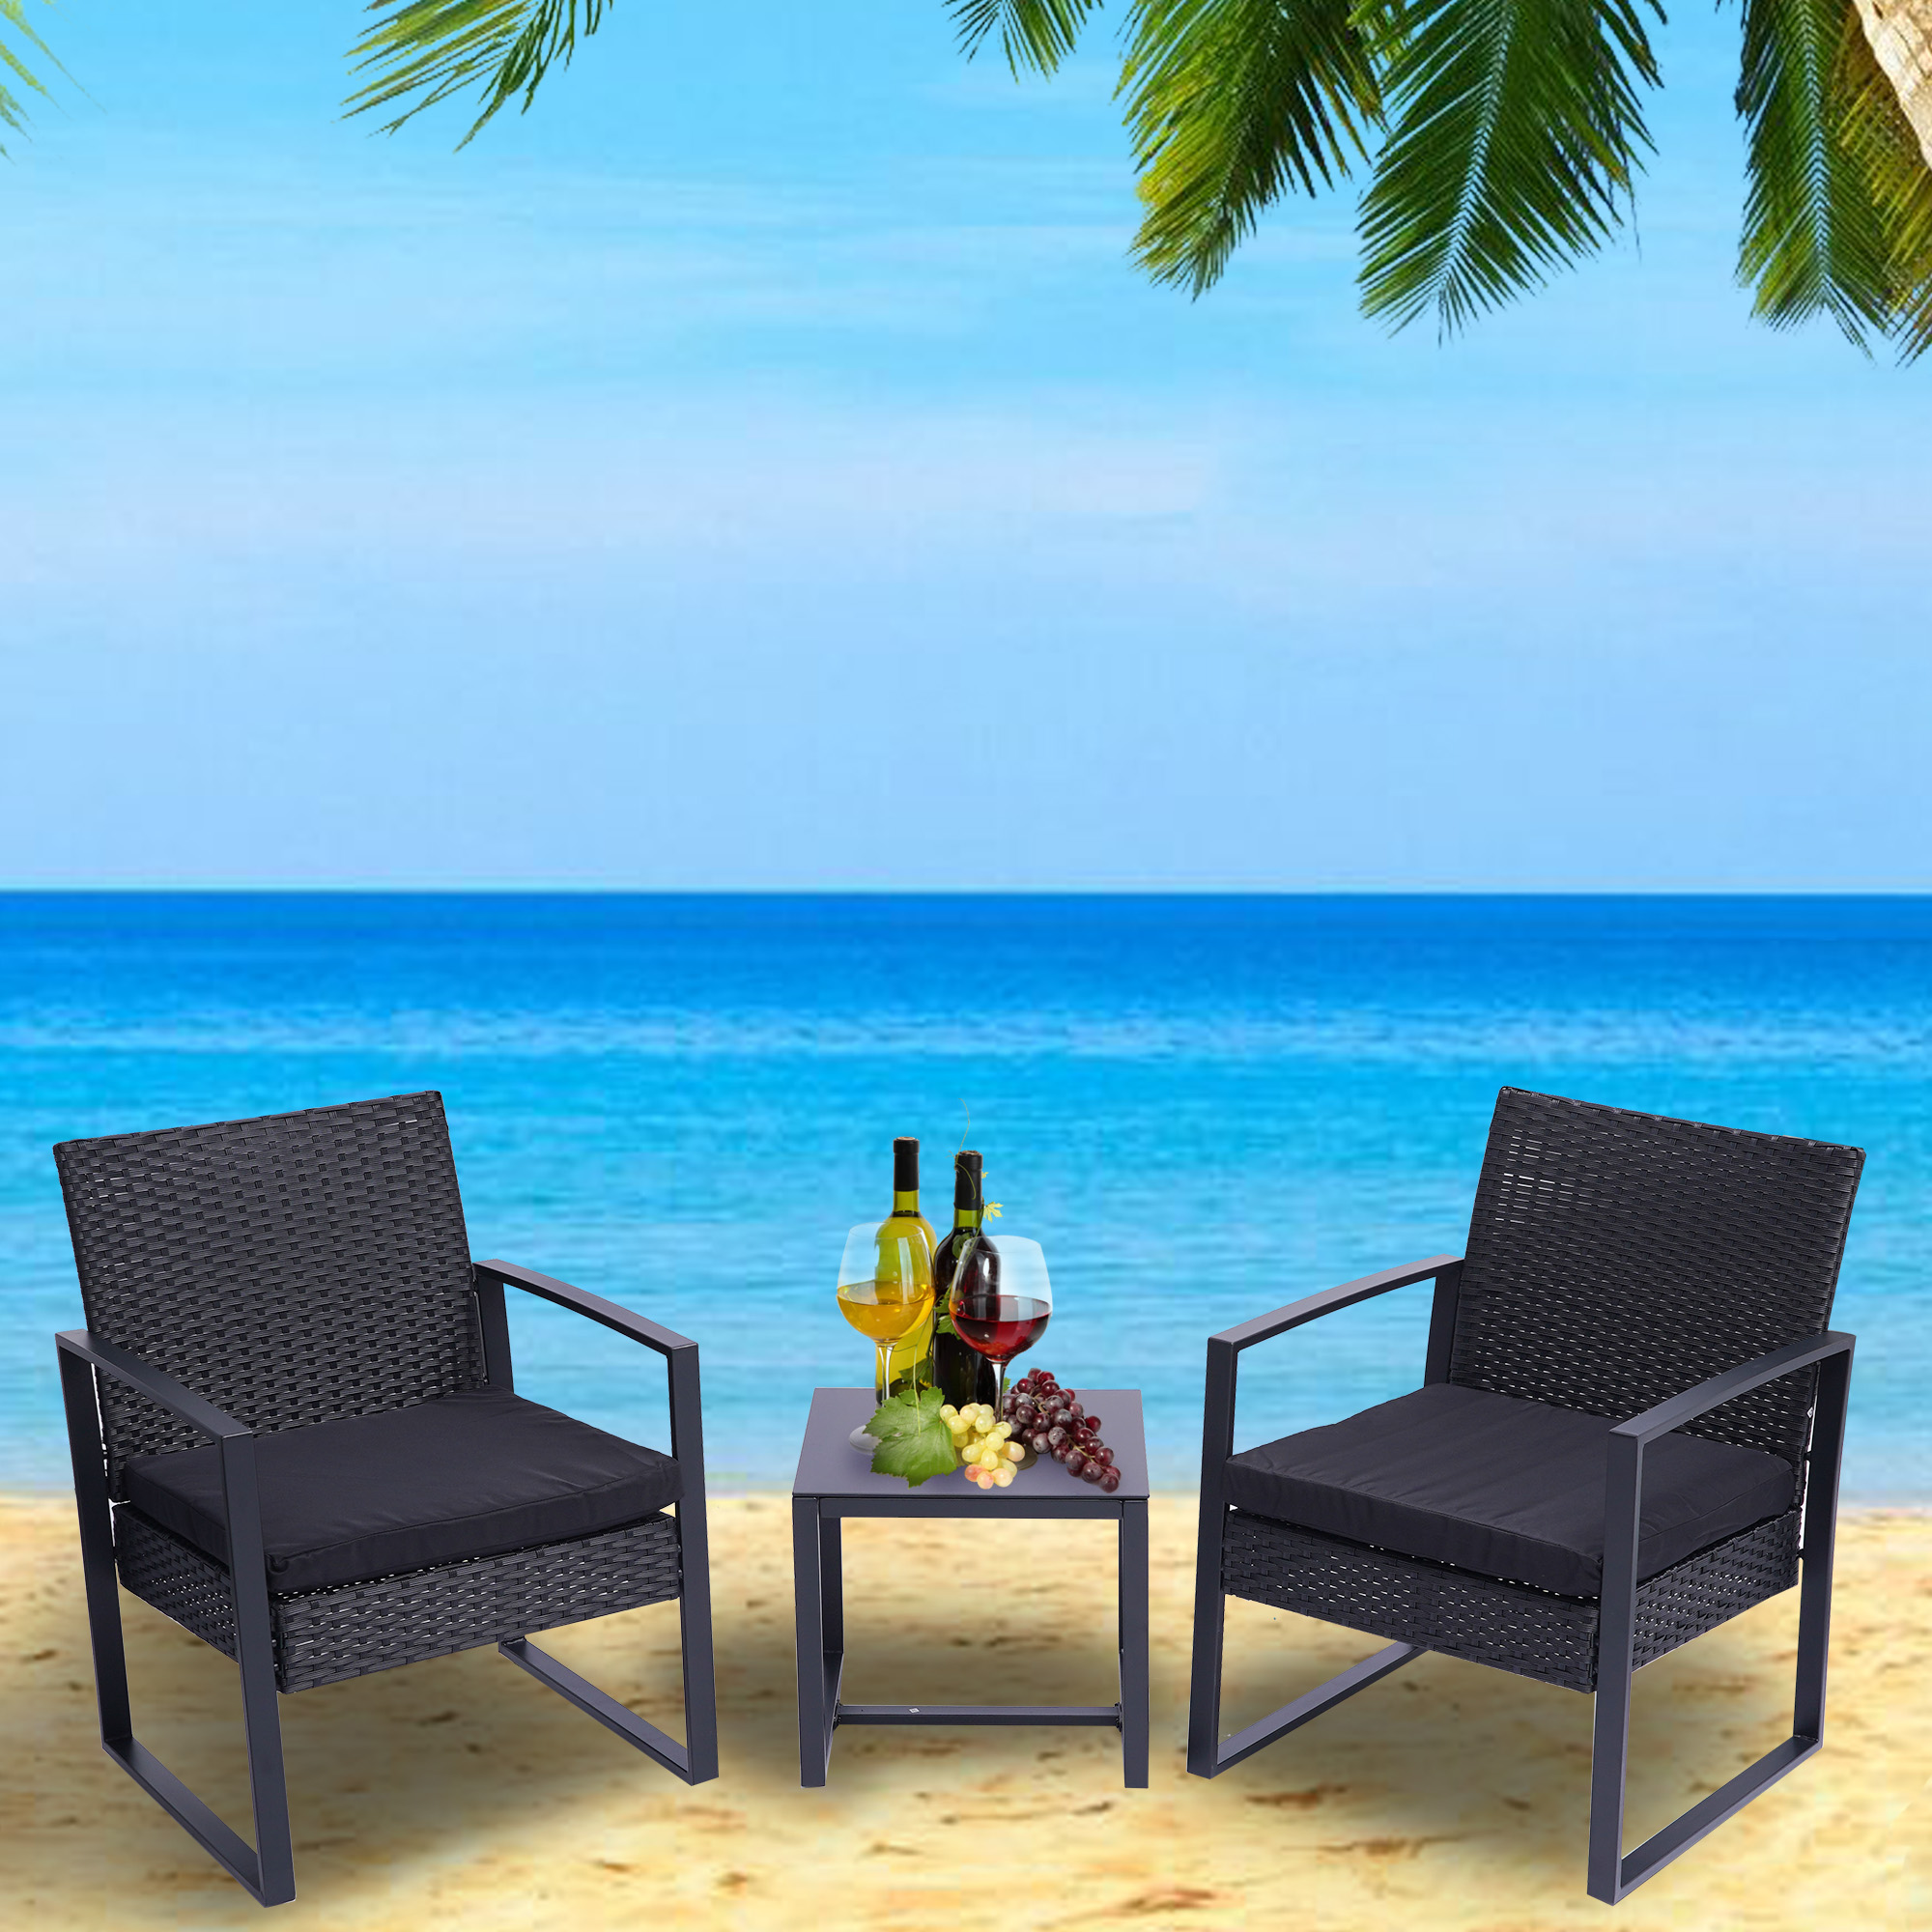 Casainc 3 Pieces Patio Set Outdoor Wicker Patio Furniture Sets Modern Set Rattan Chair Conversation Sets with Coffee Table for Yard and Bistro (Black)-CASAINC